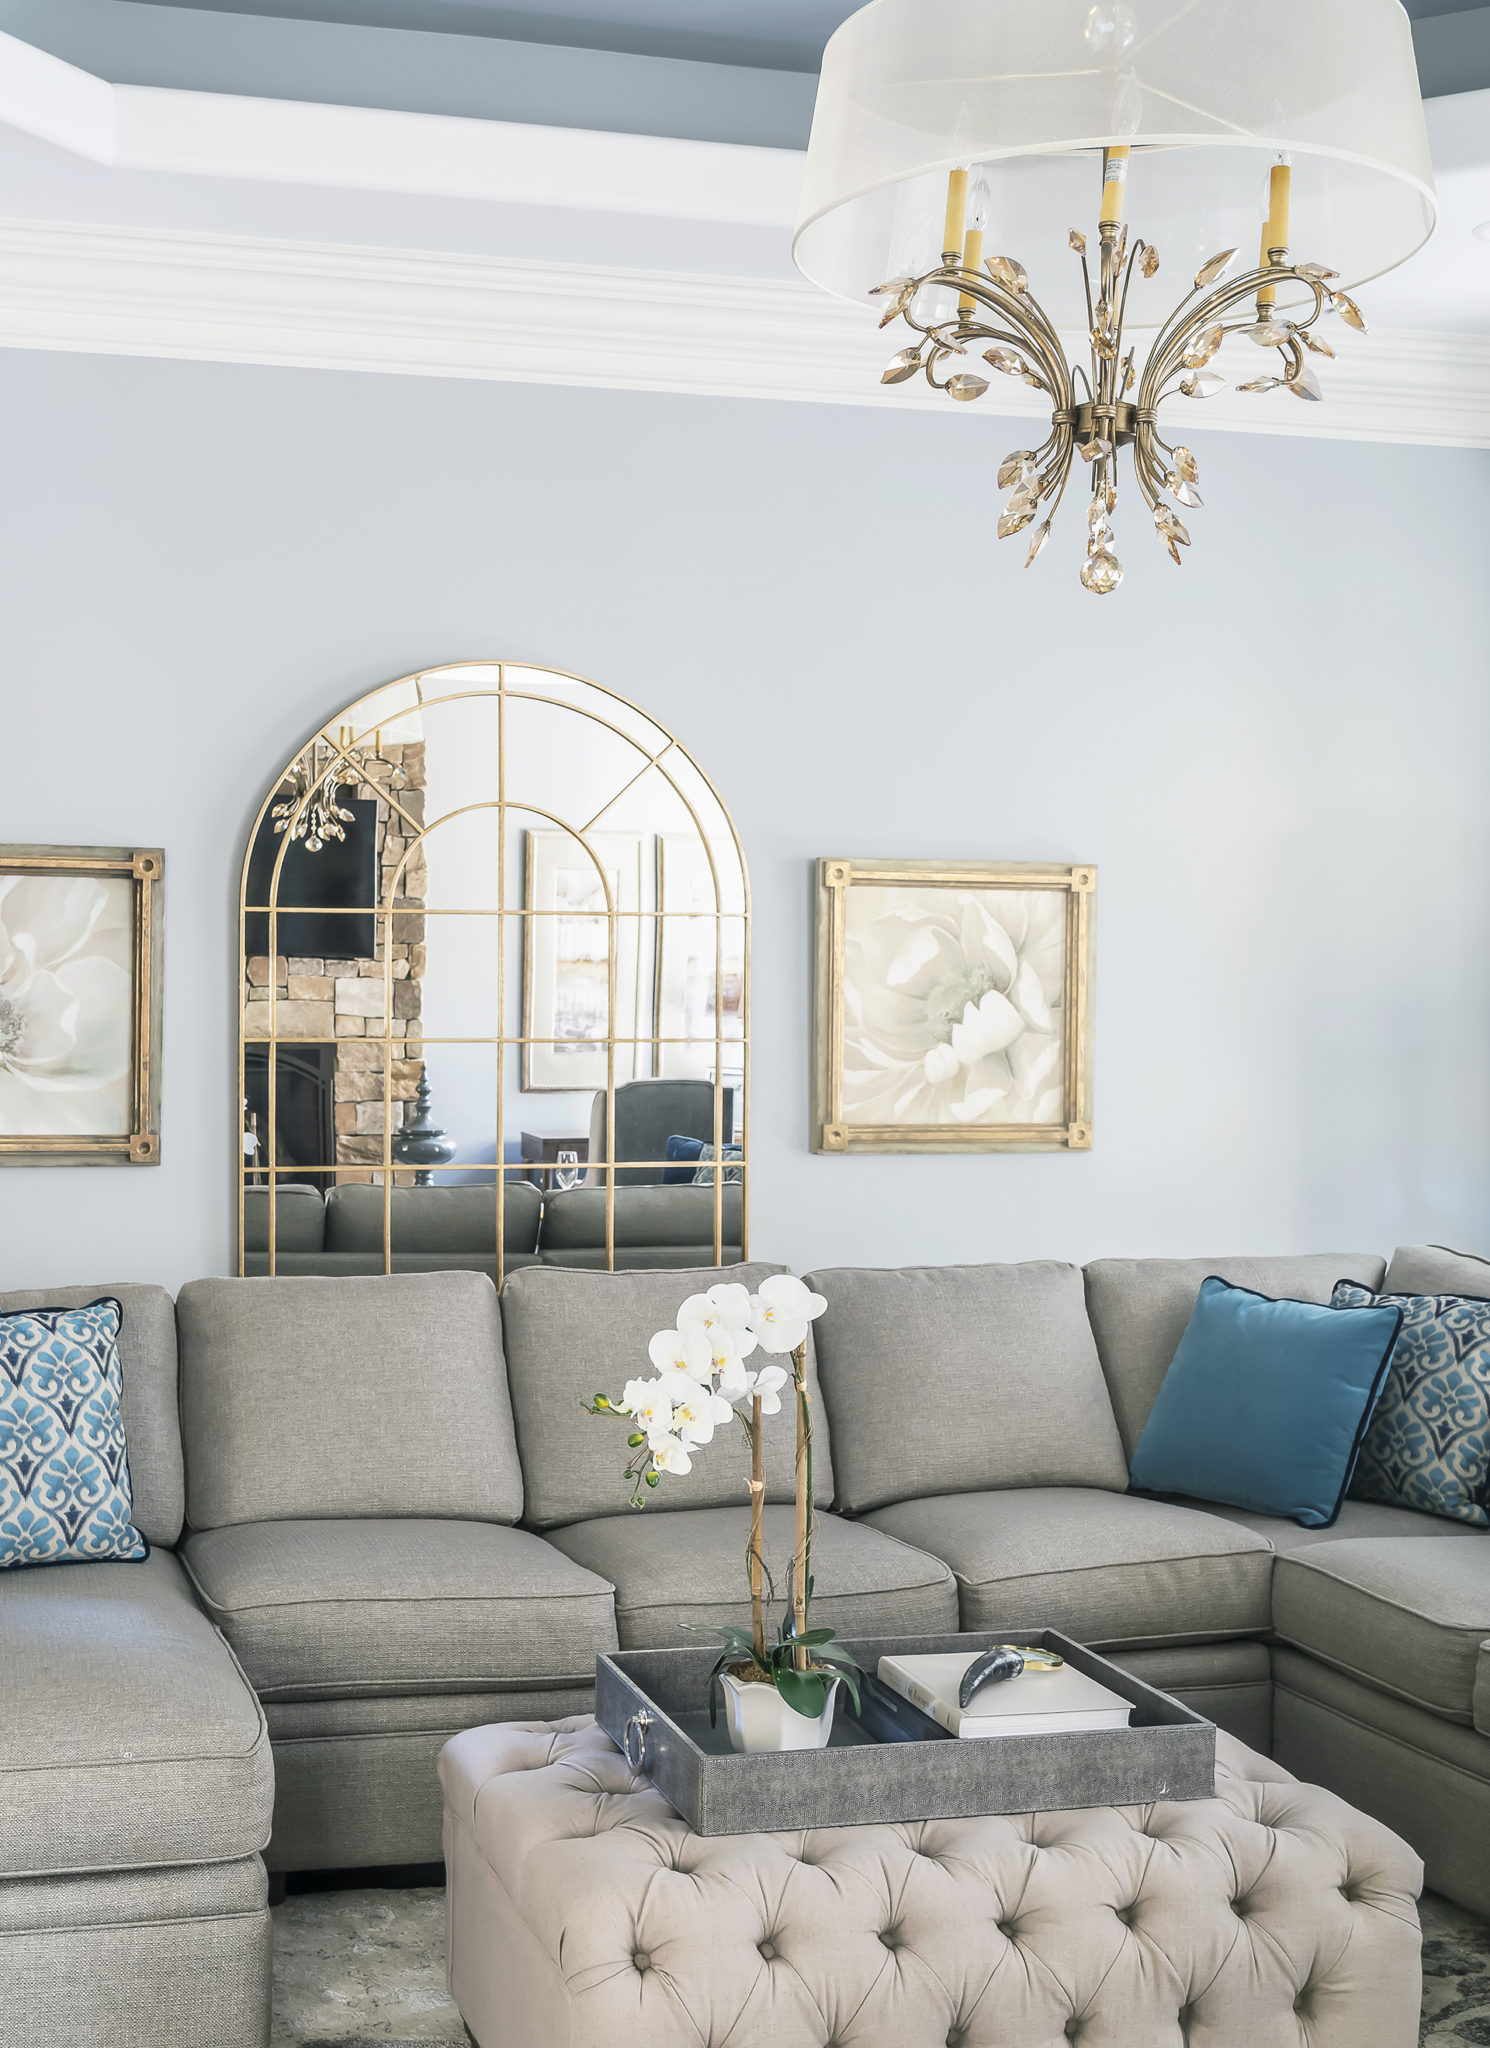 The Best Calming Paint Colors for a Relaxing Home Interior